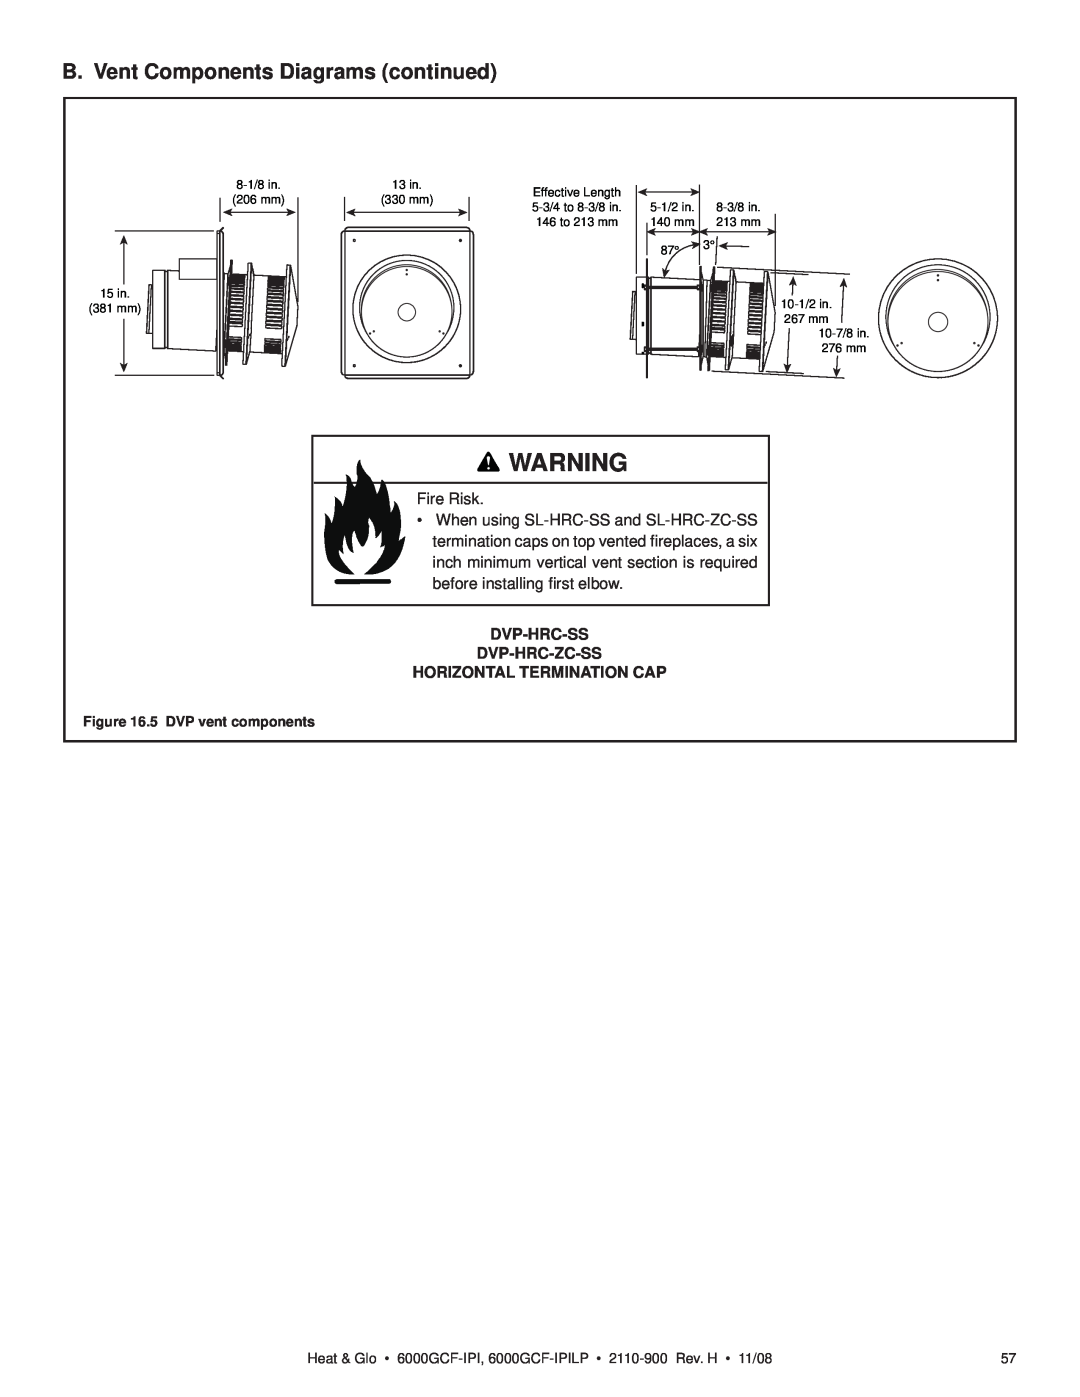 Hearth and Home Technologies 6000GCF-IPI B. Vent Components Diagrams continued, Fire Risk, before installing ﬁrst elbow 